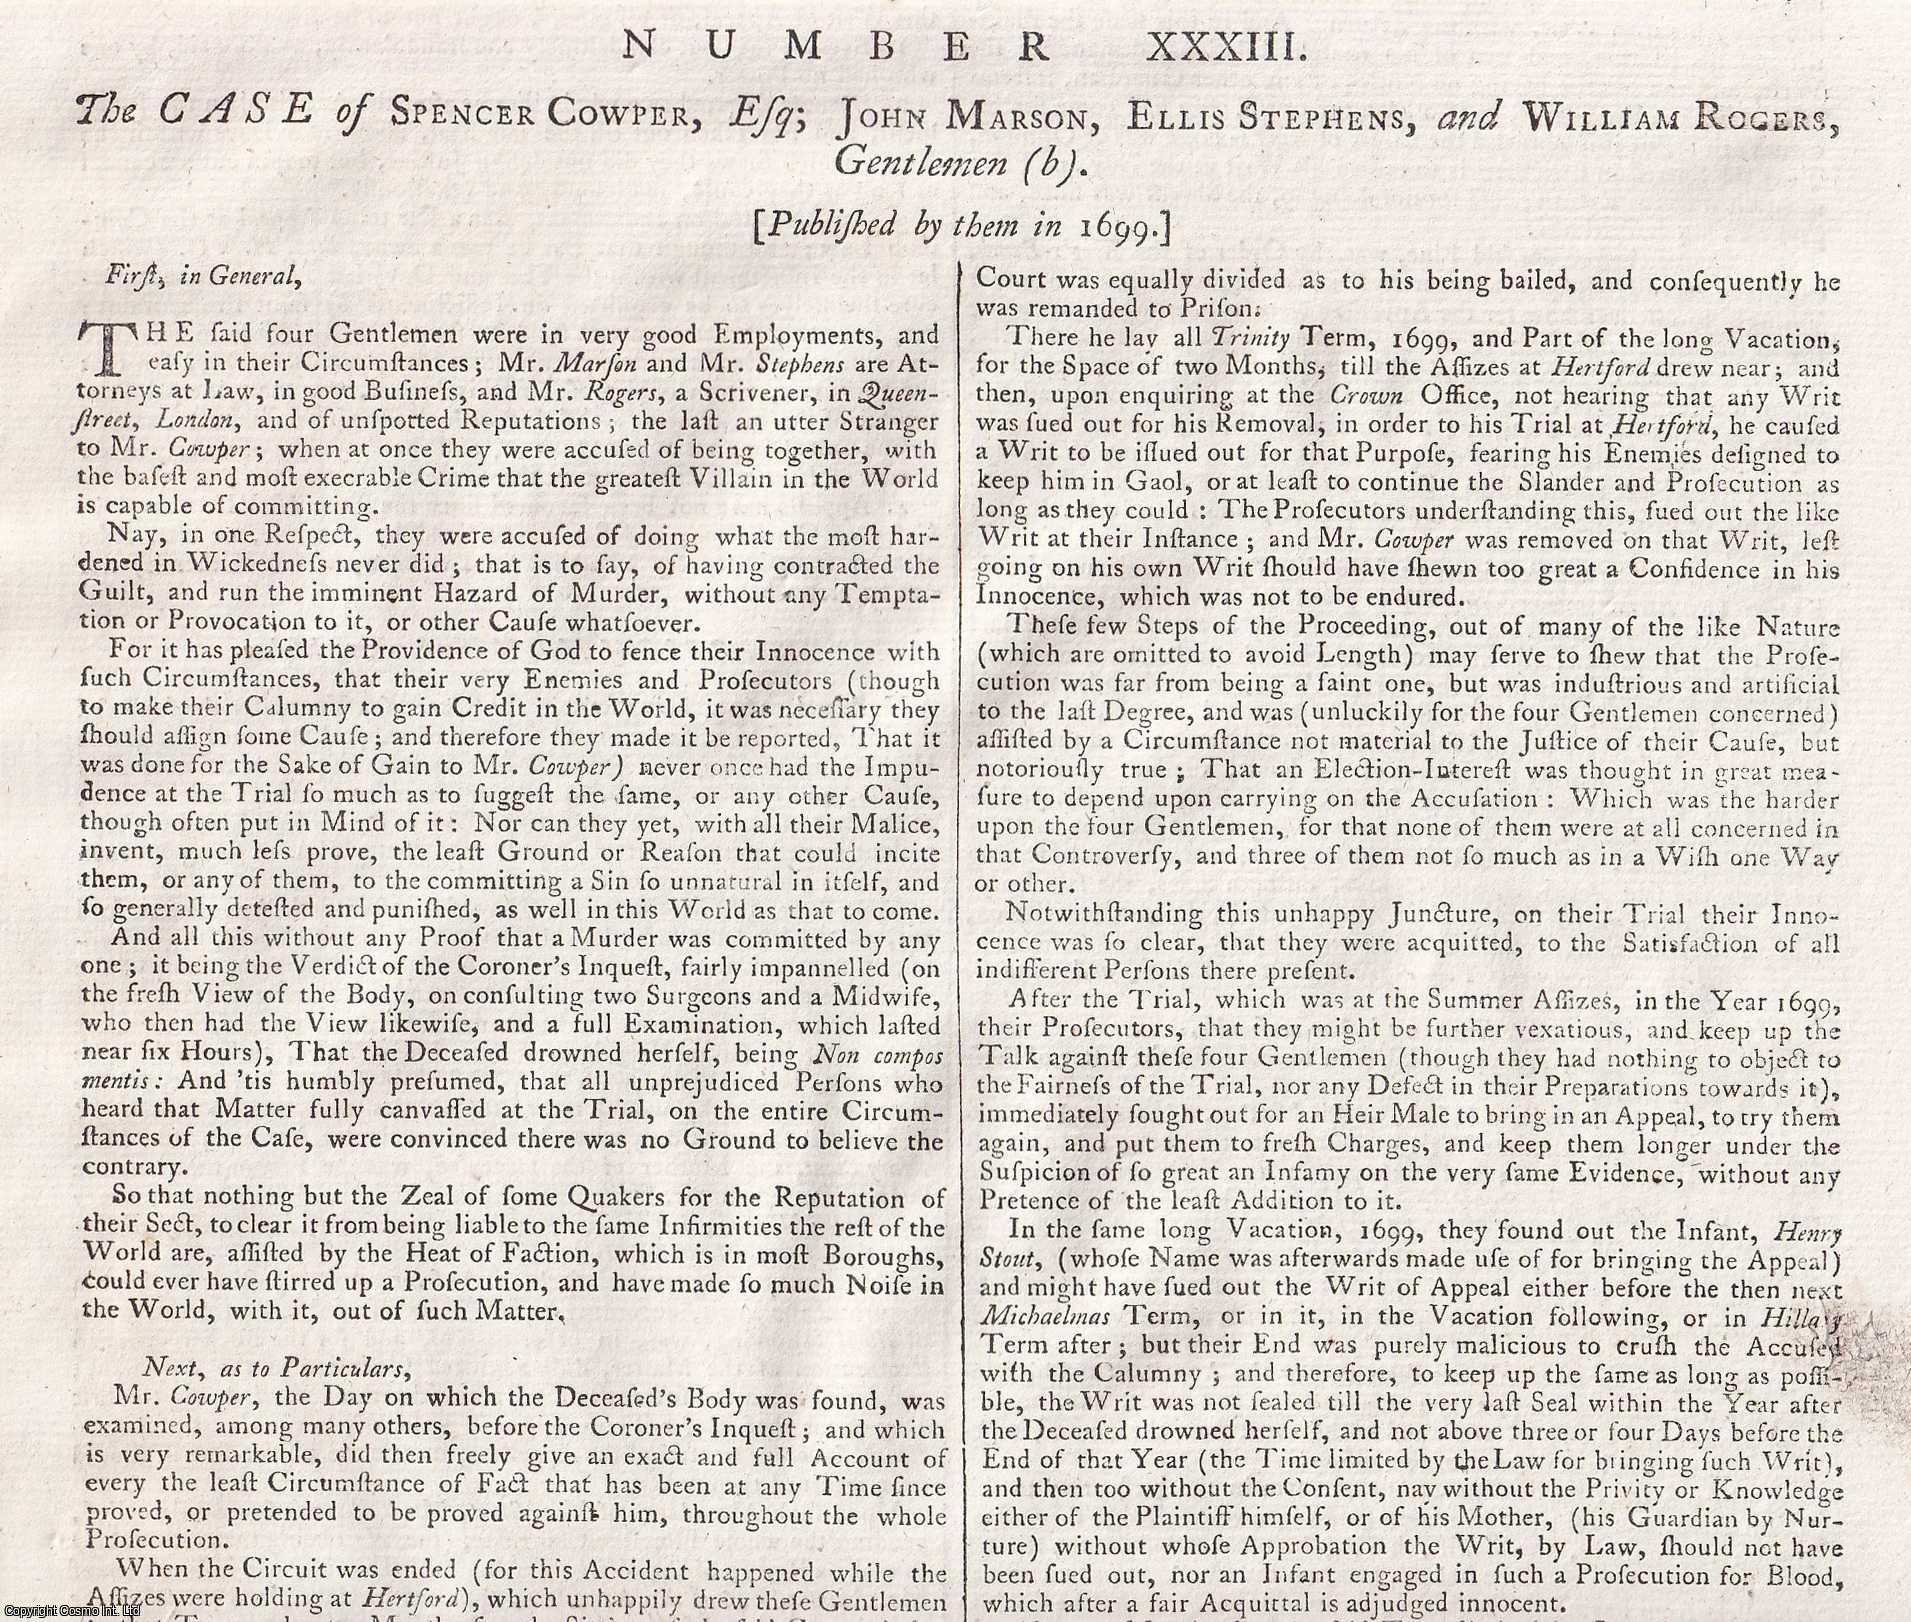 [Trial] - MURDER OF SARAH STOUT. The Case of Spencer Cowper, Esq; John Marson, Ellis Stephens, and William Rogers, Gentlemen. 1699. An original article from the Collected State Trials.